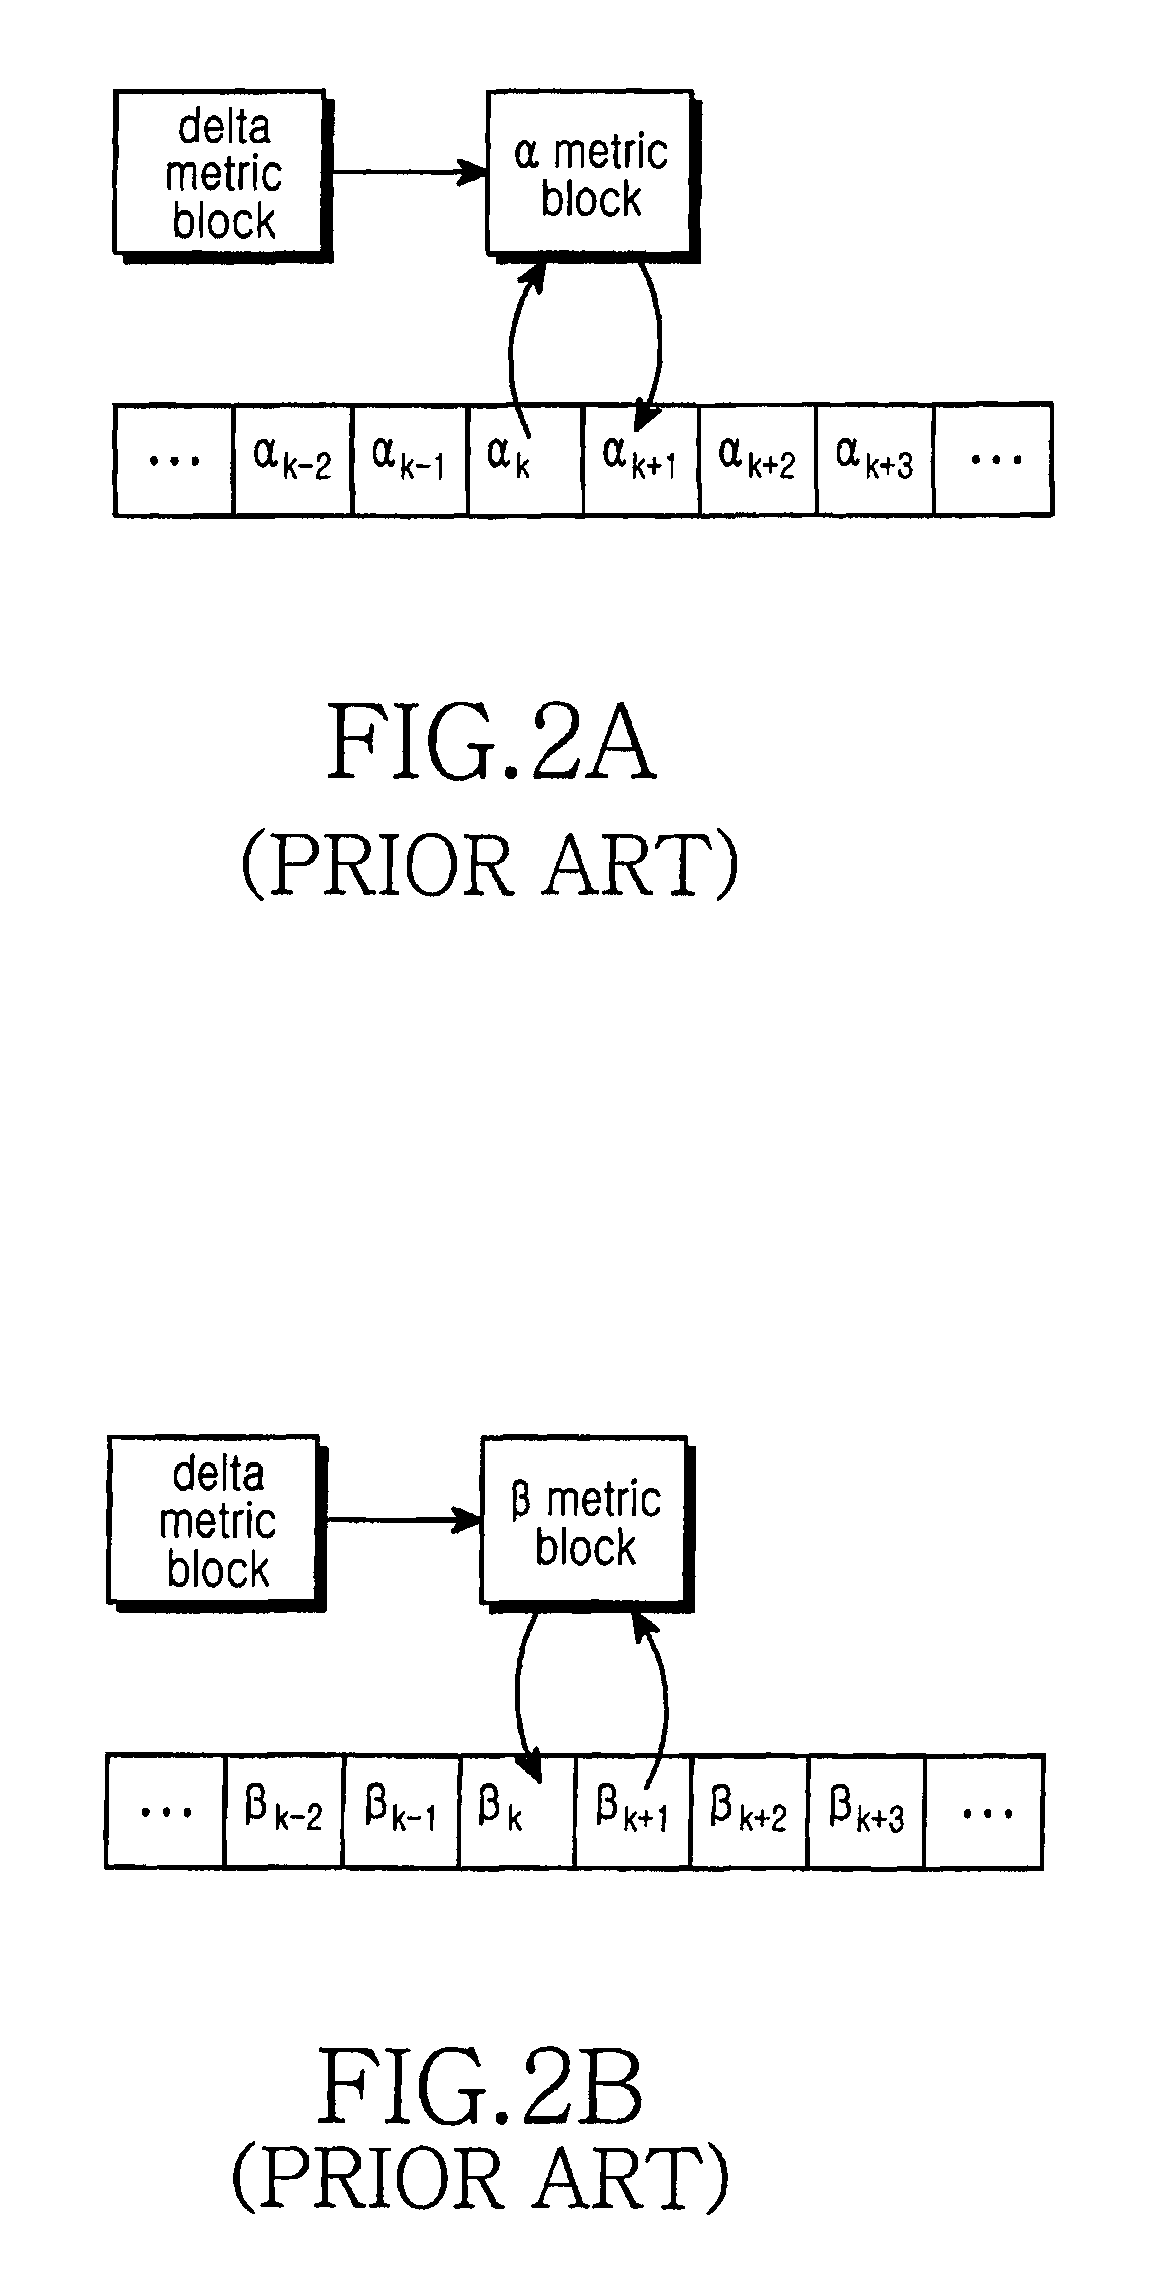 Apparatus and method for turbo decoding using a variable window size